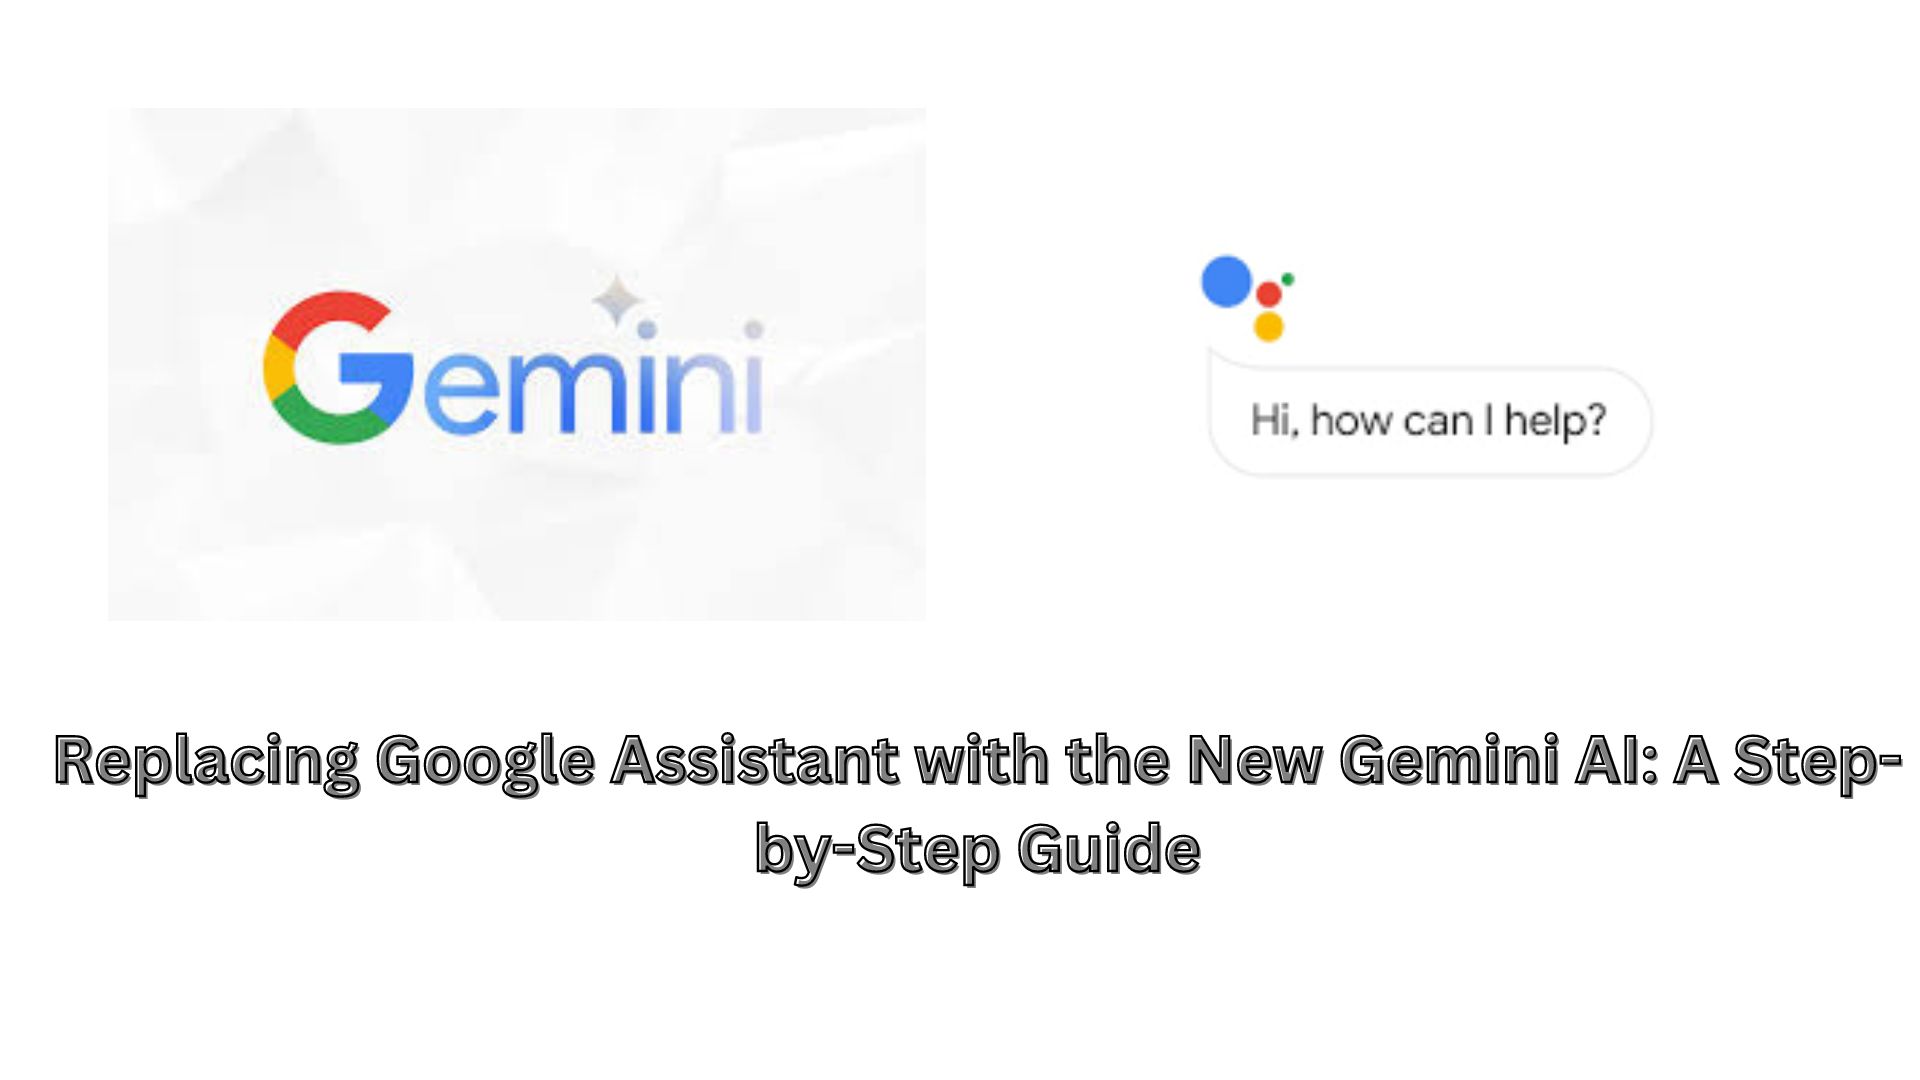 Replacing Google Assistant with the New Gemini AI: A Step-by-Step Guide